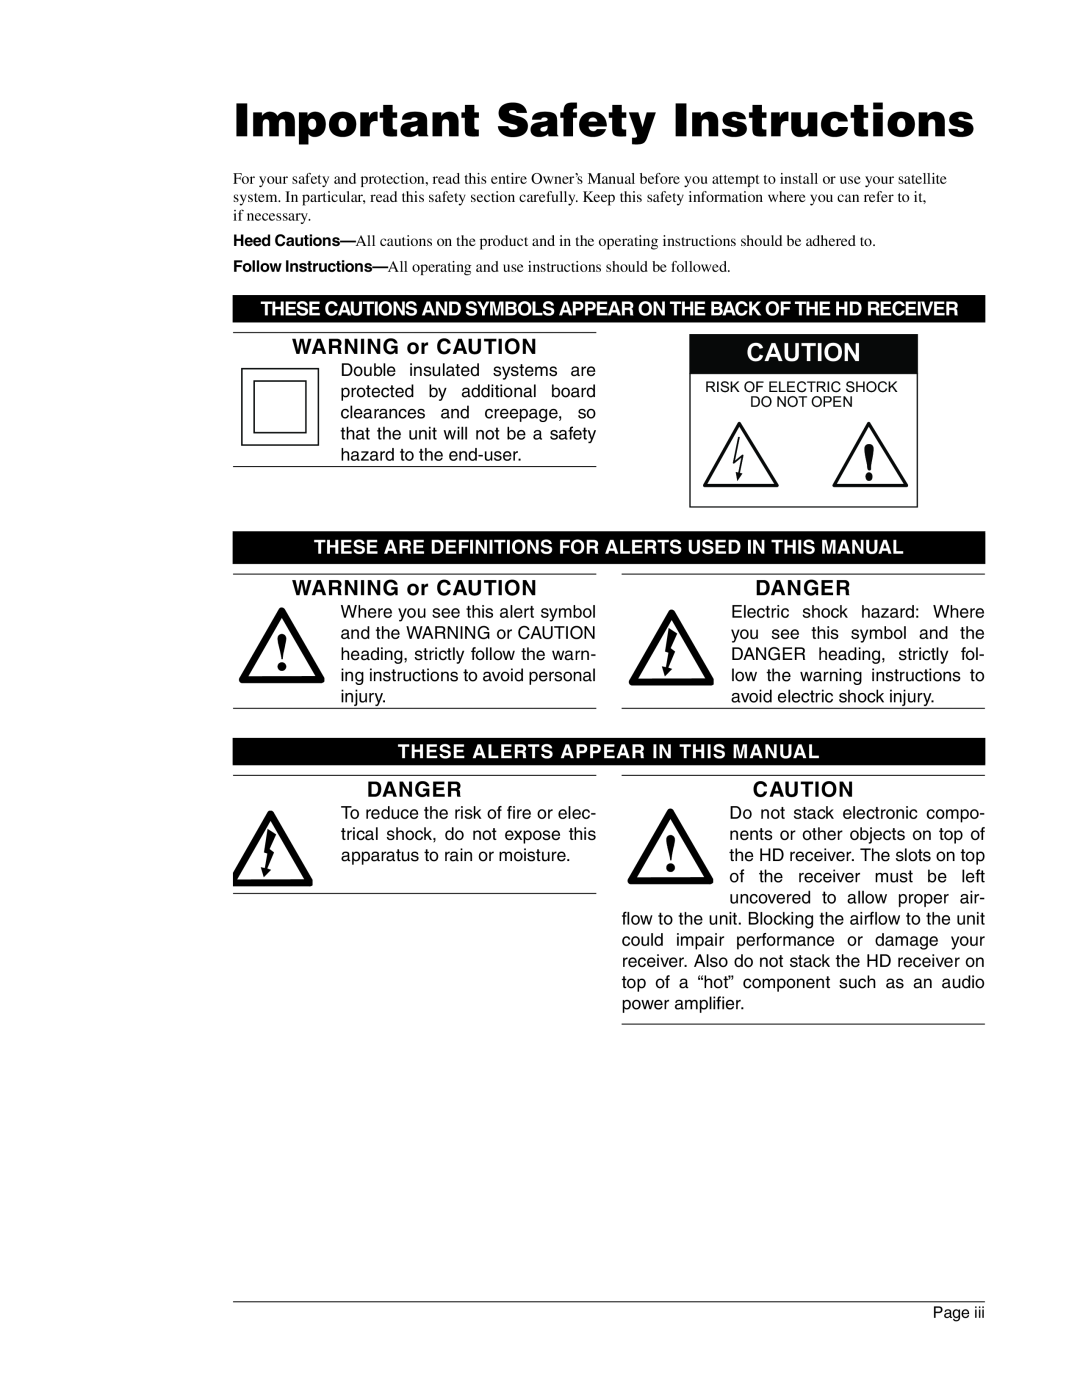 DirecTV HIRD-E86 manual WARNING or CAUTION, Danger, Important Safety Instructions 